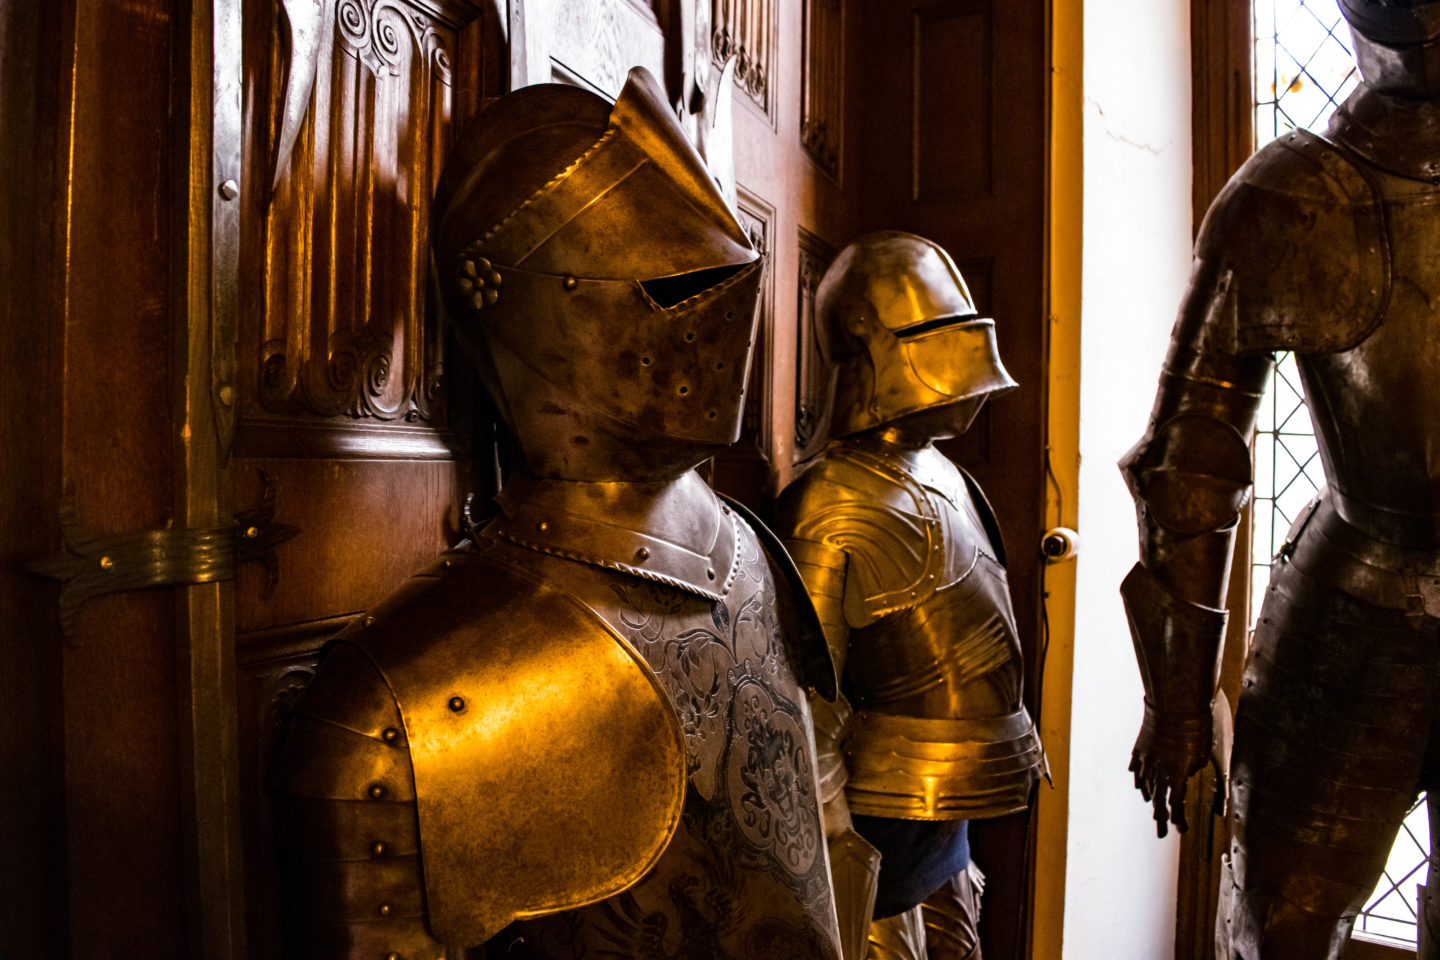 Suits of armour are everywhere